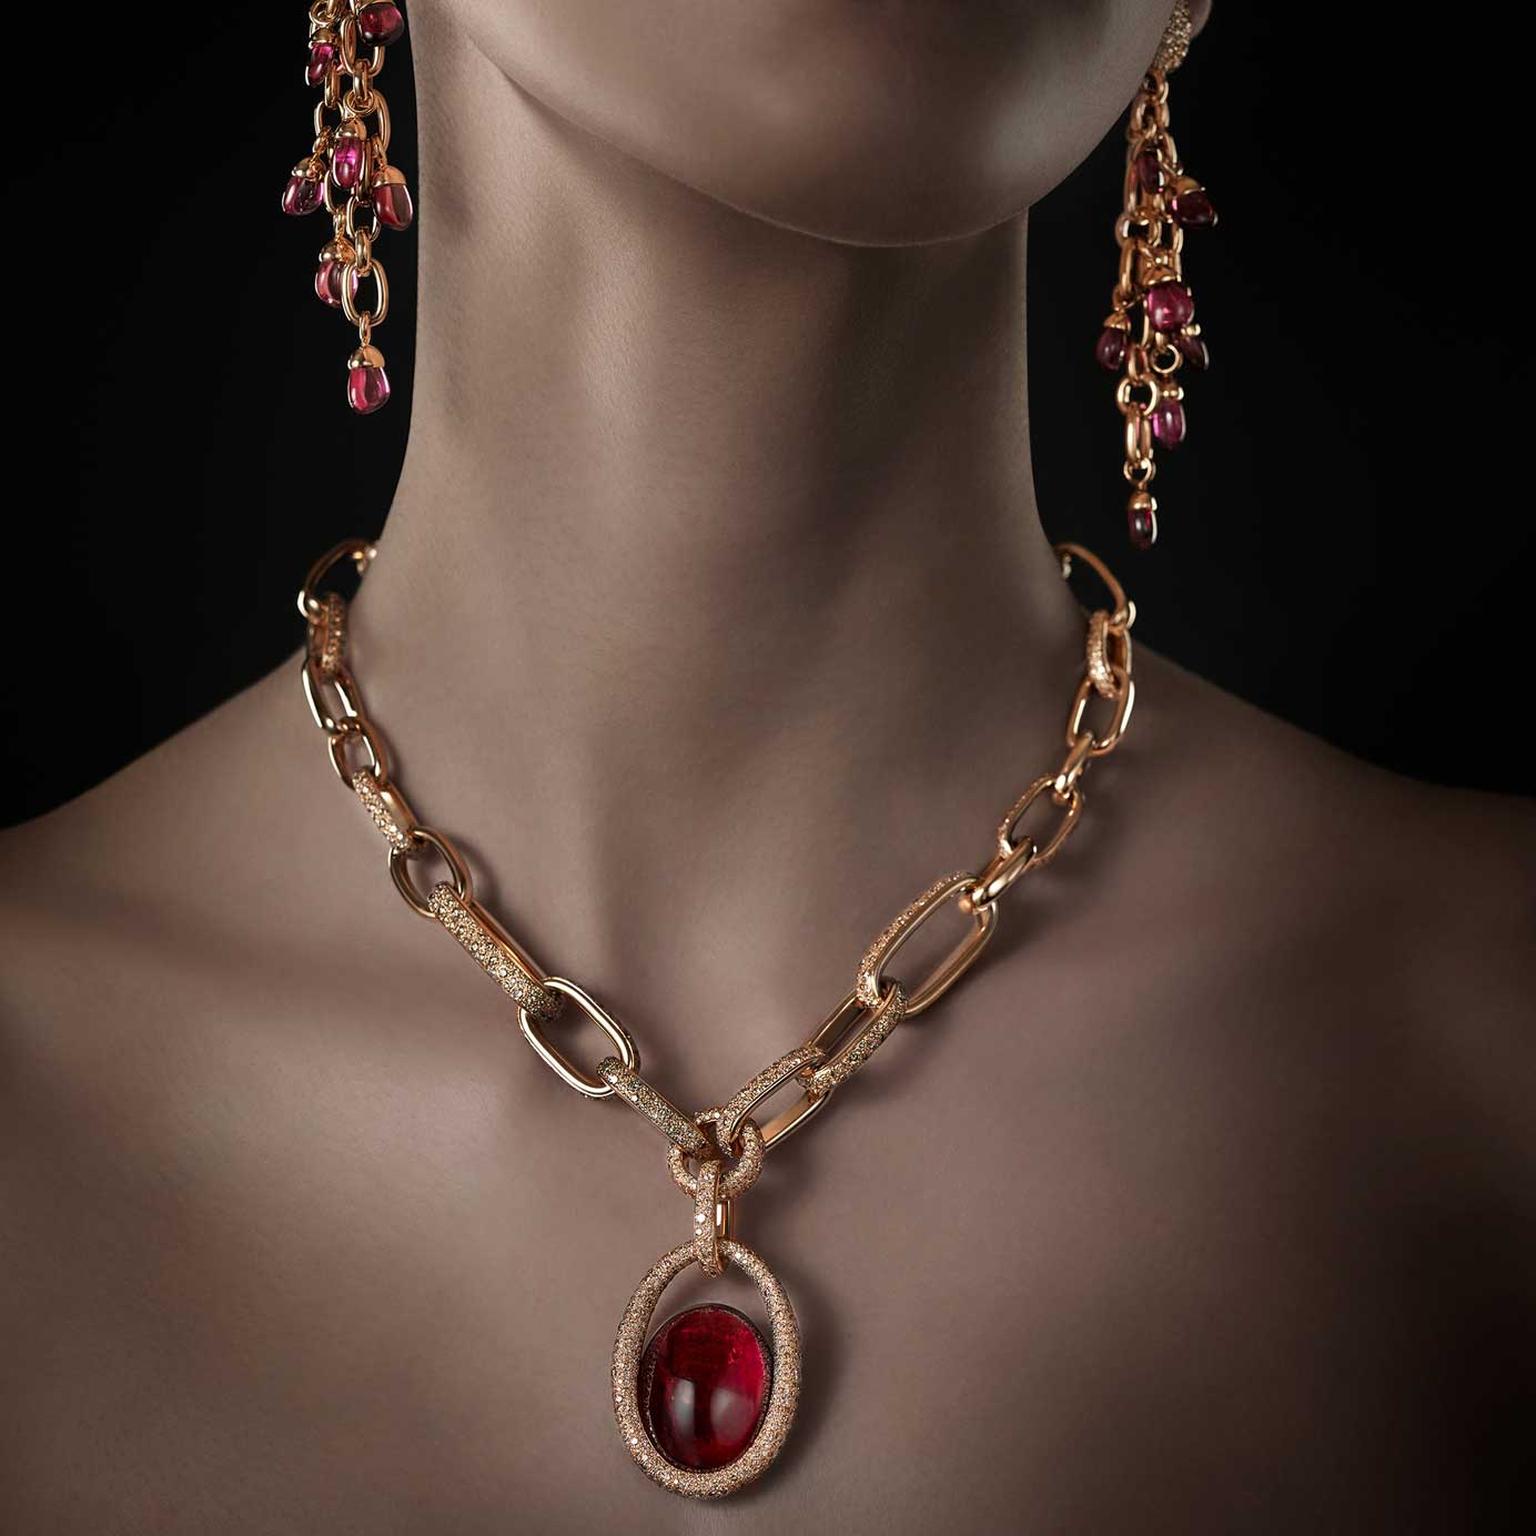 Pomellato's High Jewelry Brings Milanese Inspiration to Paris